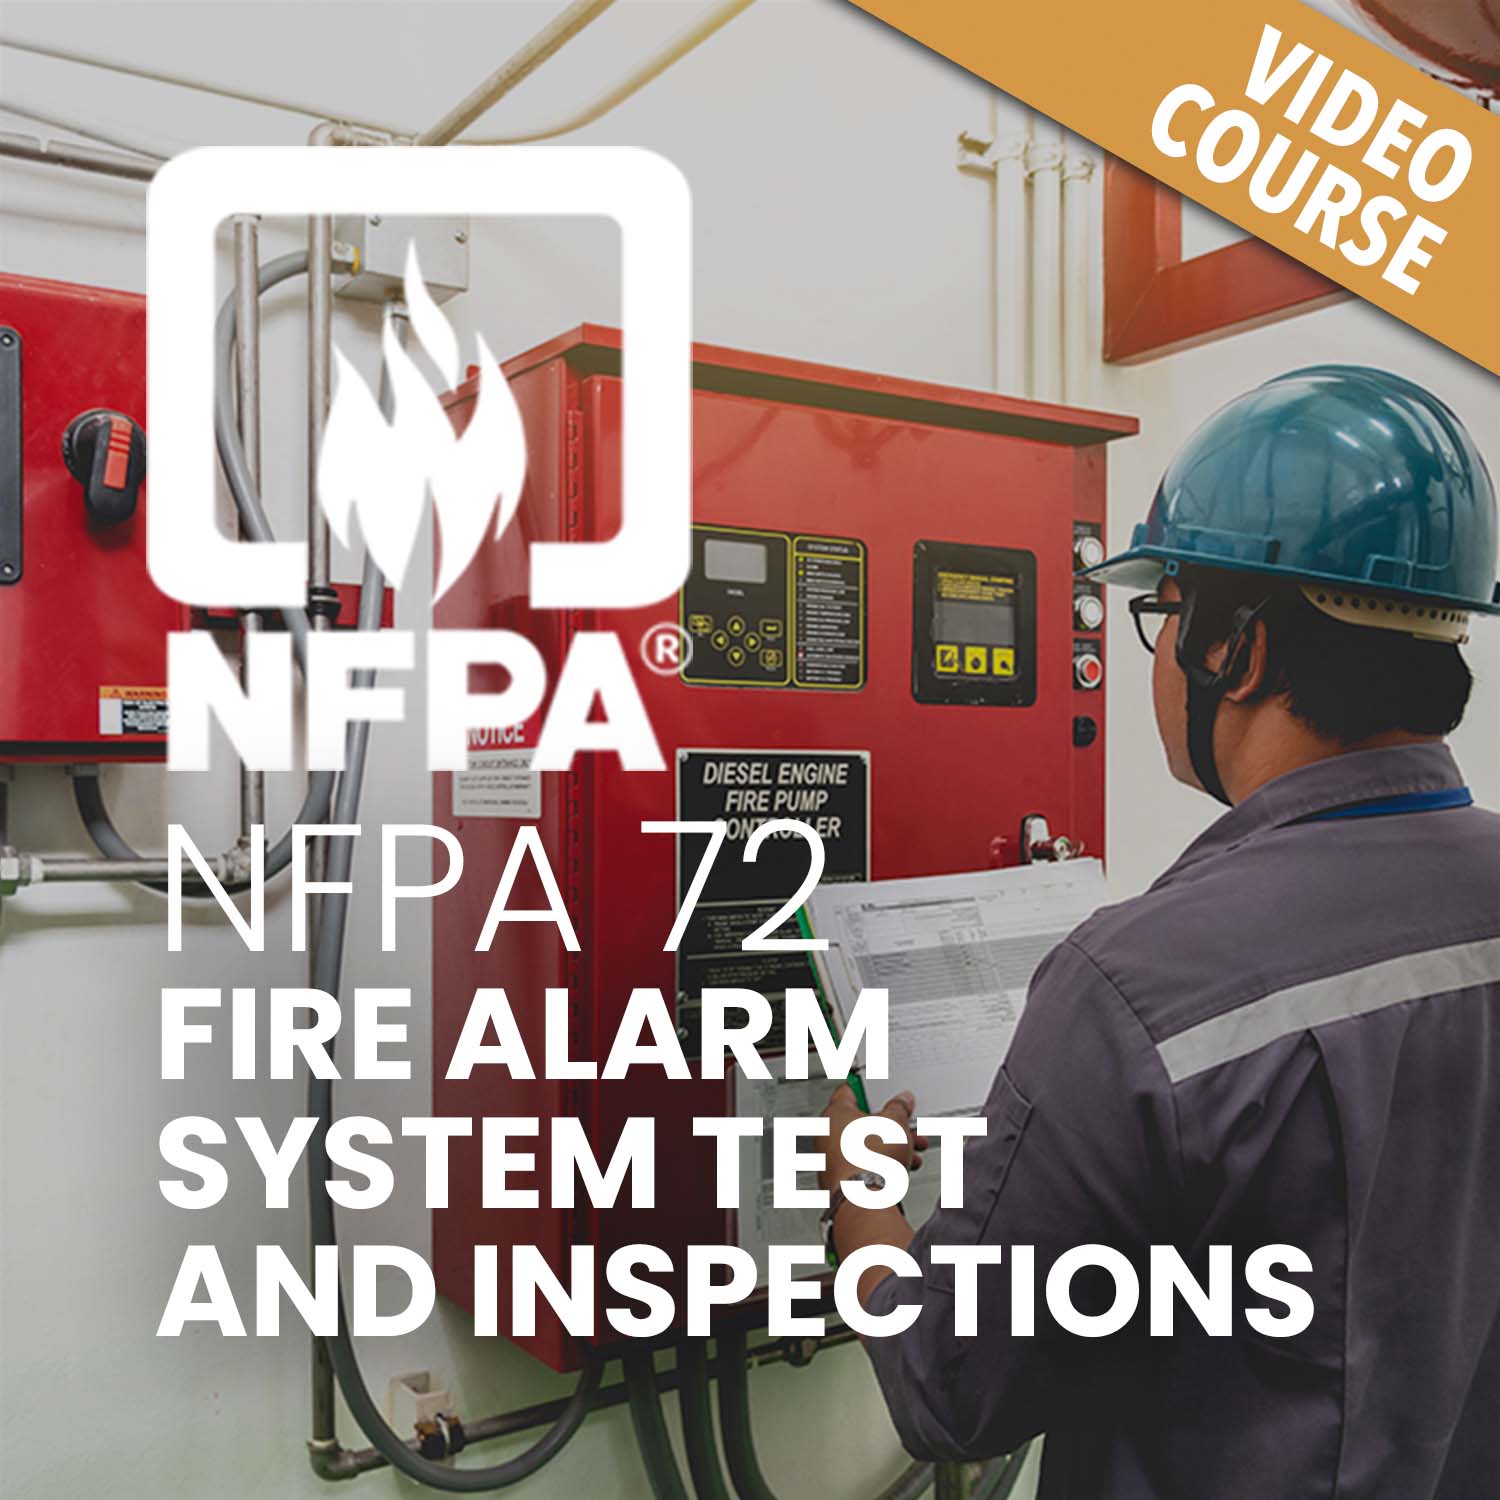 NFPA 72 Fire Alarm System Testing and Inspections | ETI Continuing ...